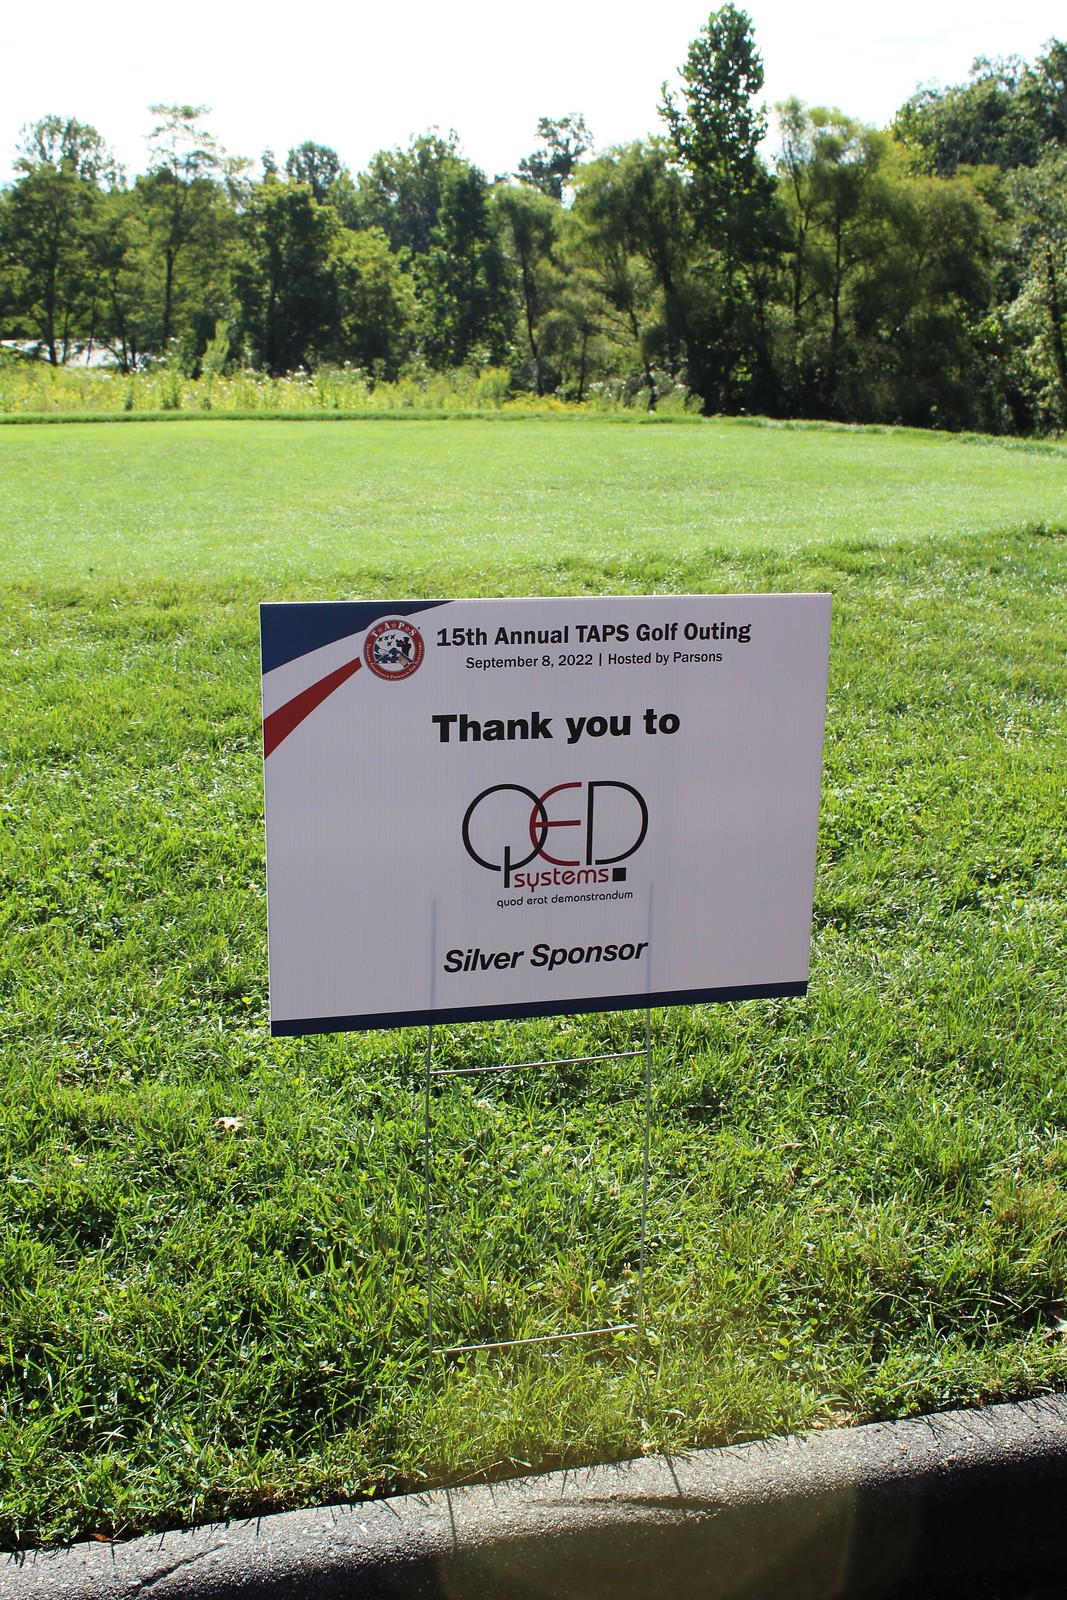 2022_SPEV_15th Annual TAPS Golf Outing 20